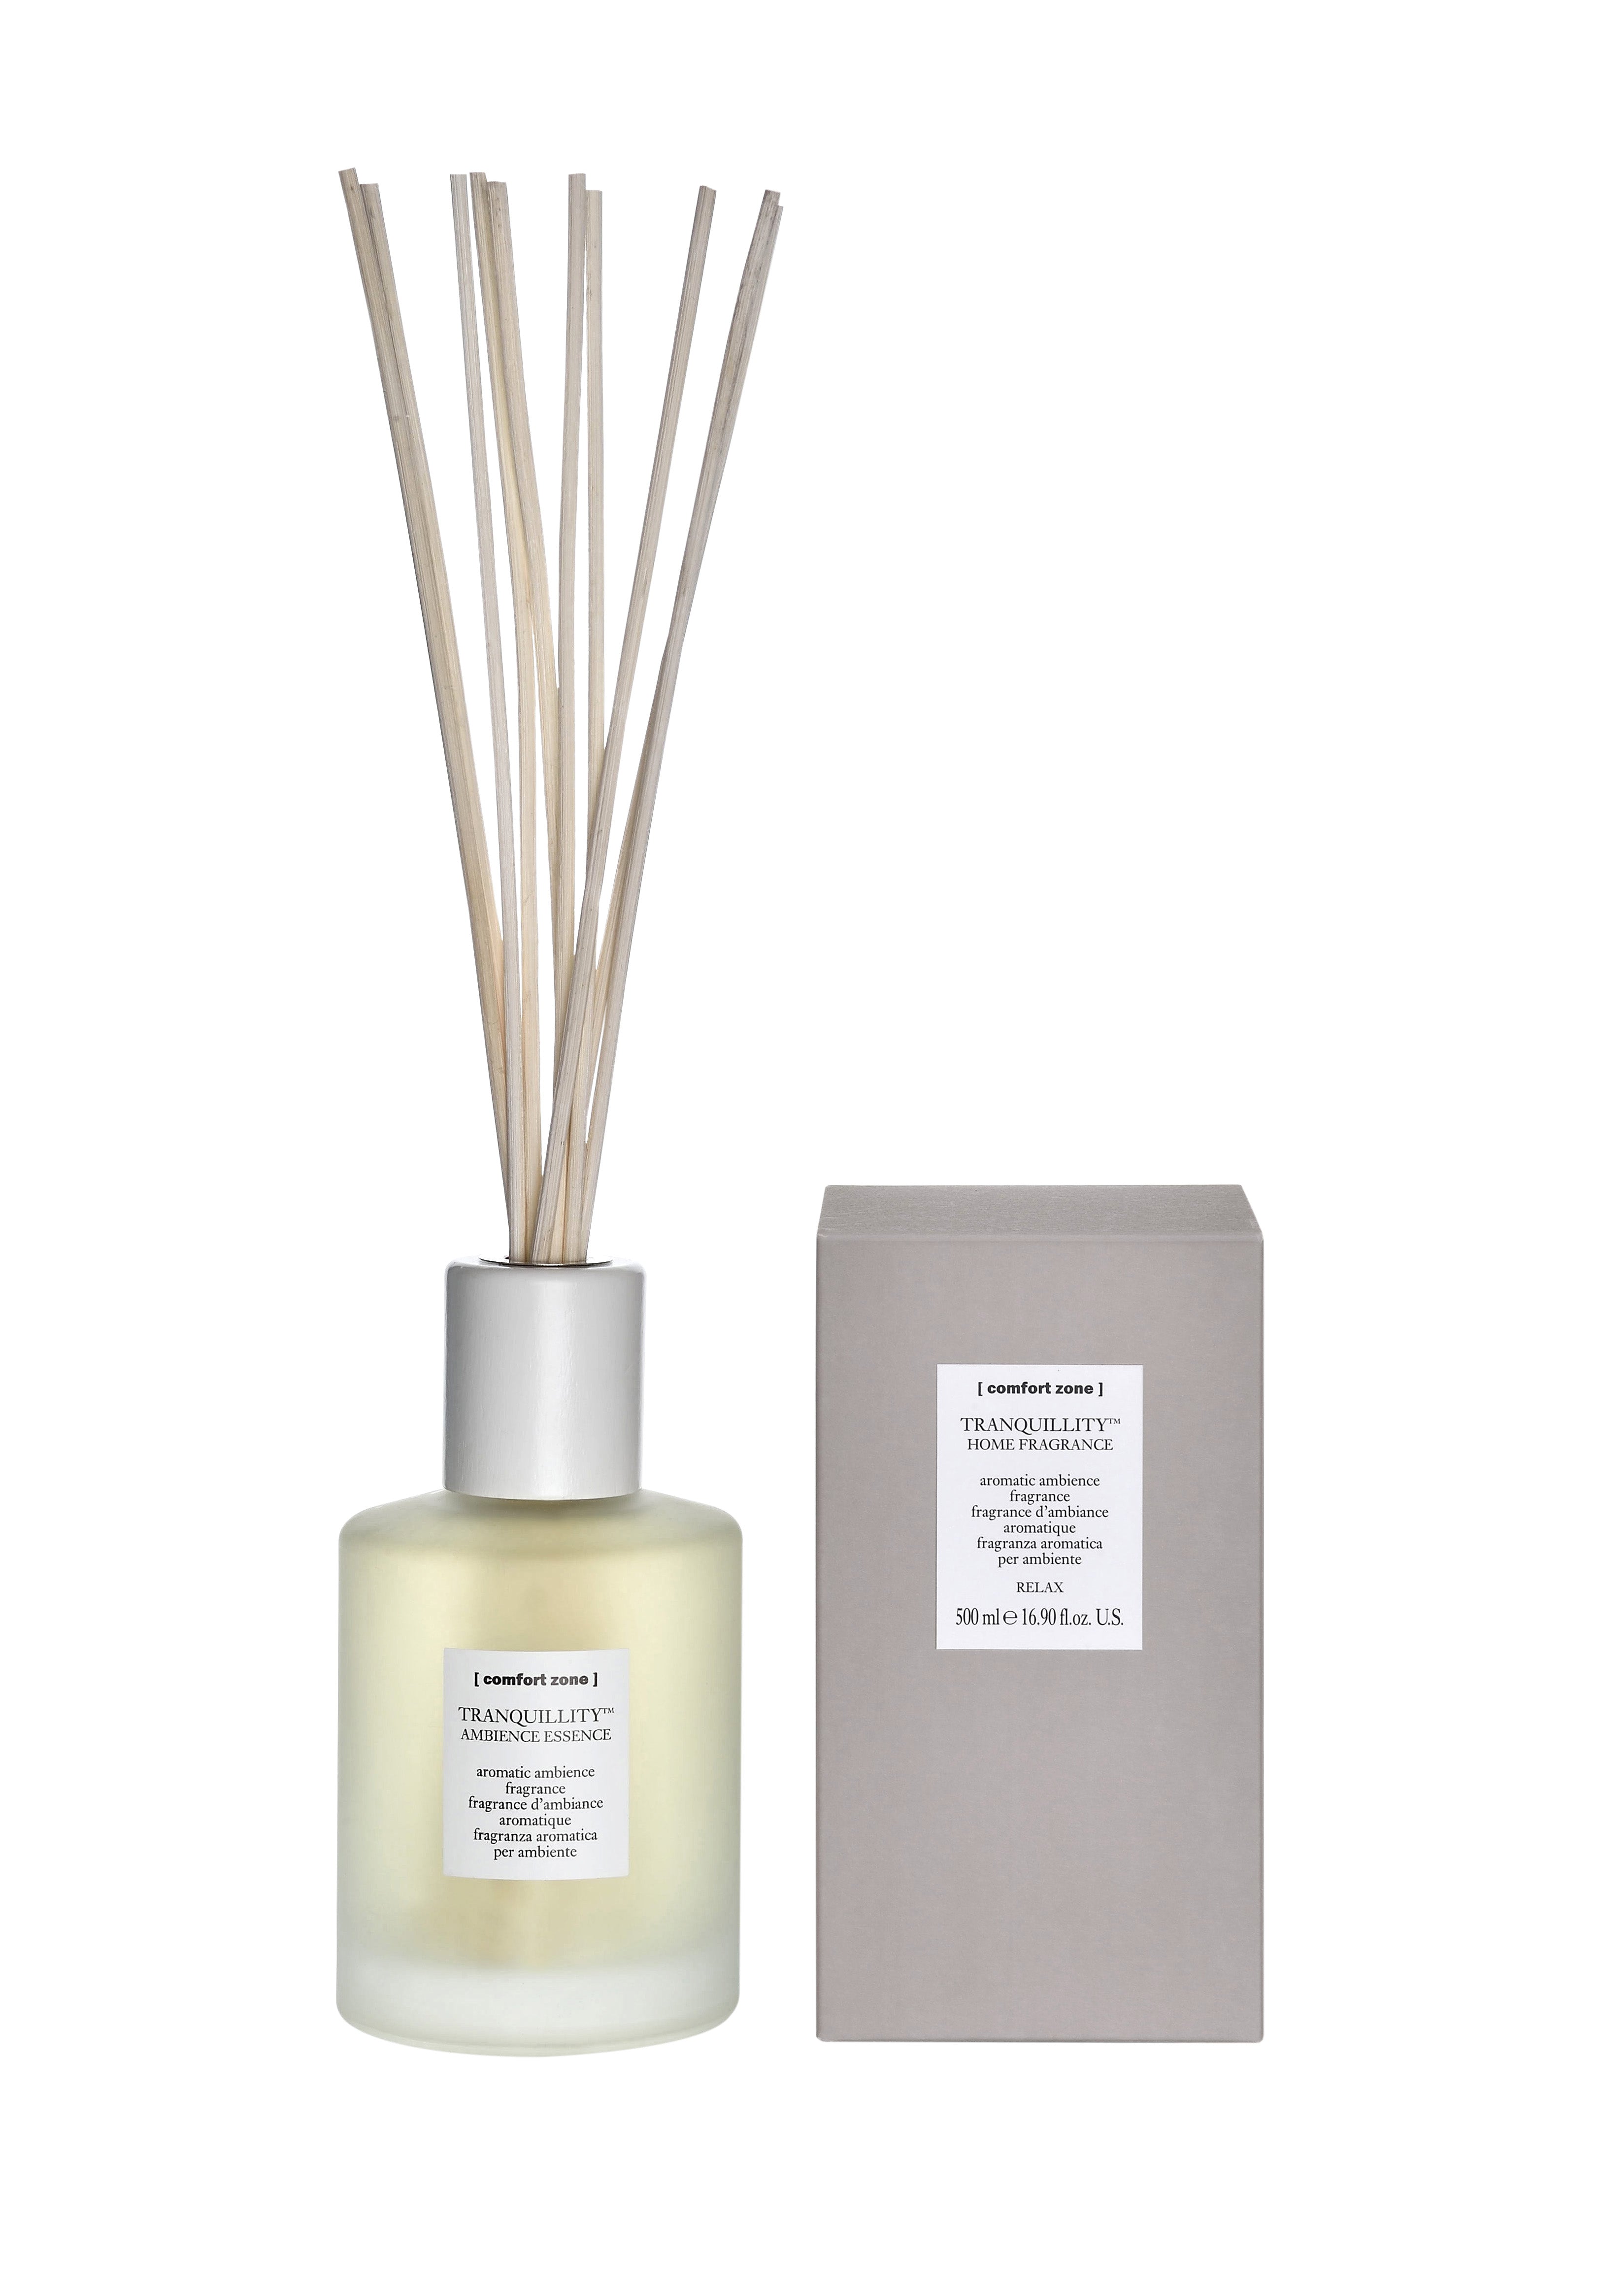 Tranquillity reed diffuser